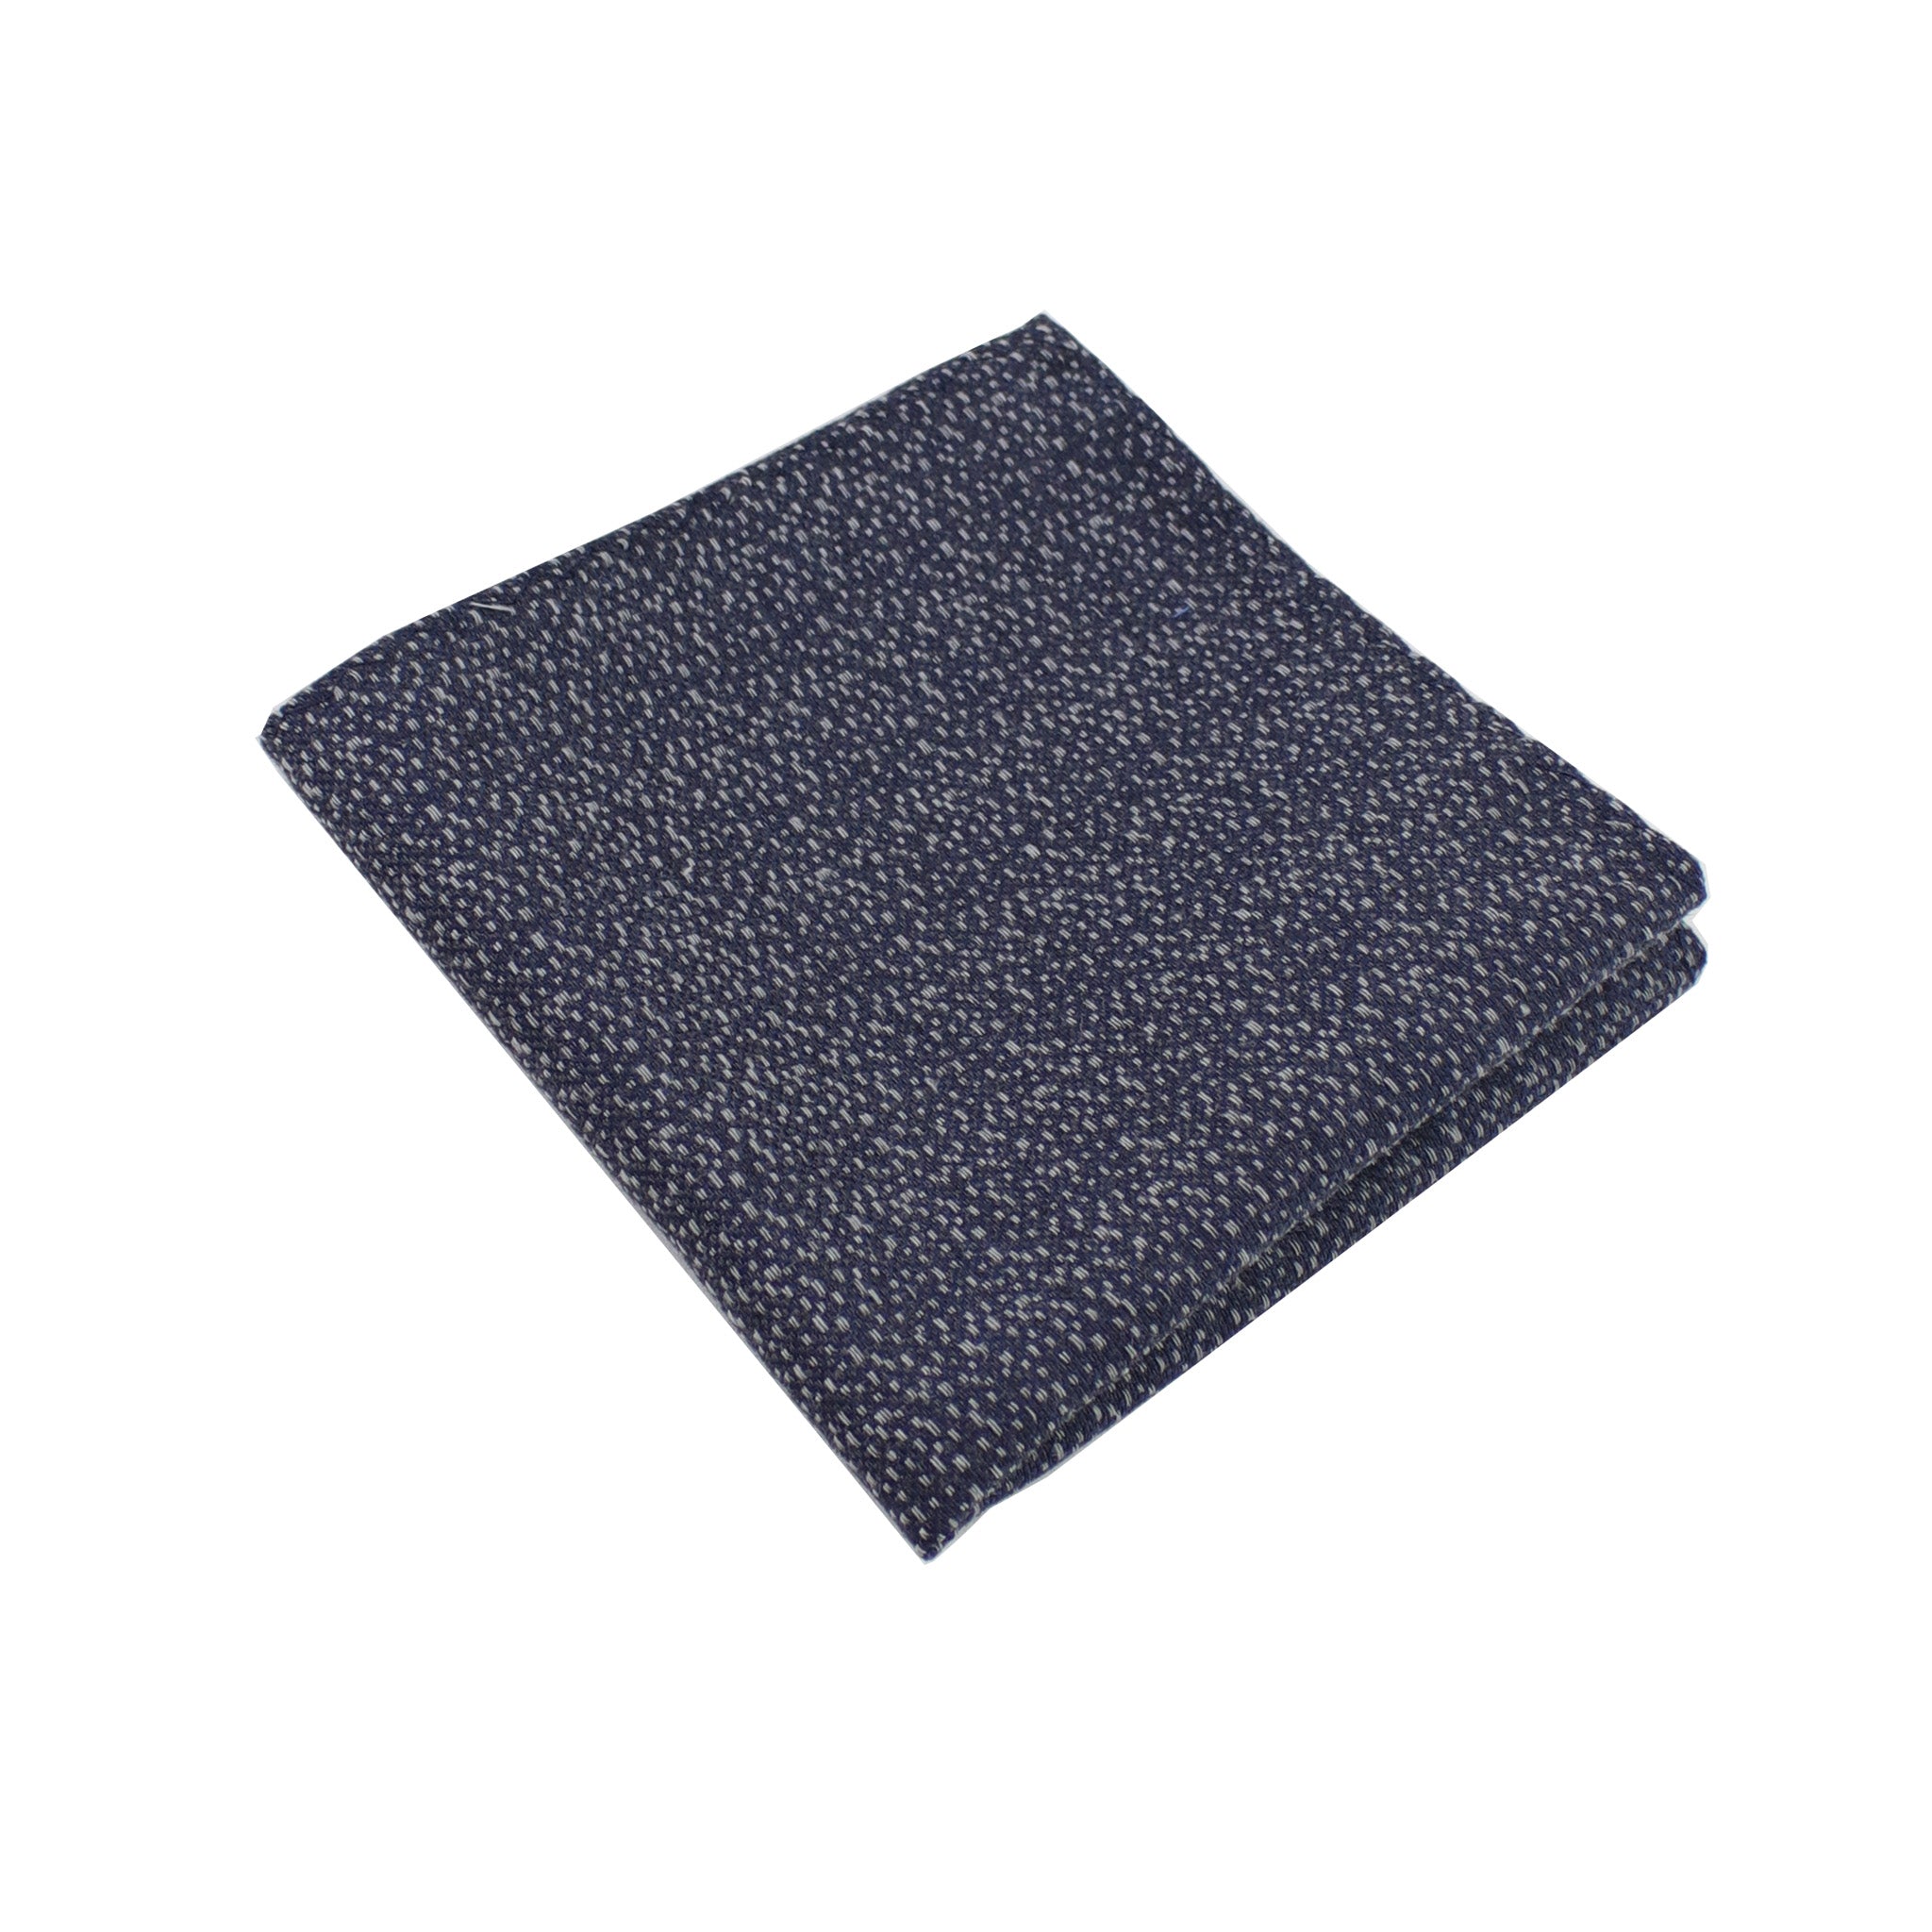 Charcoal & Silver Heather Pocket Square from DIBI